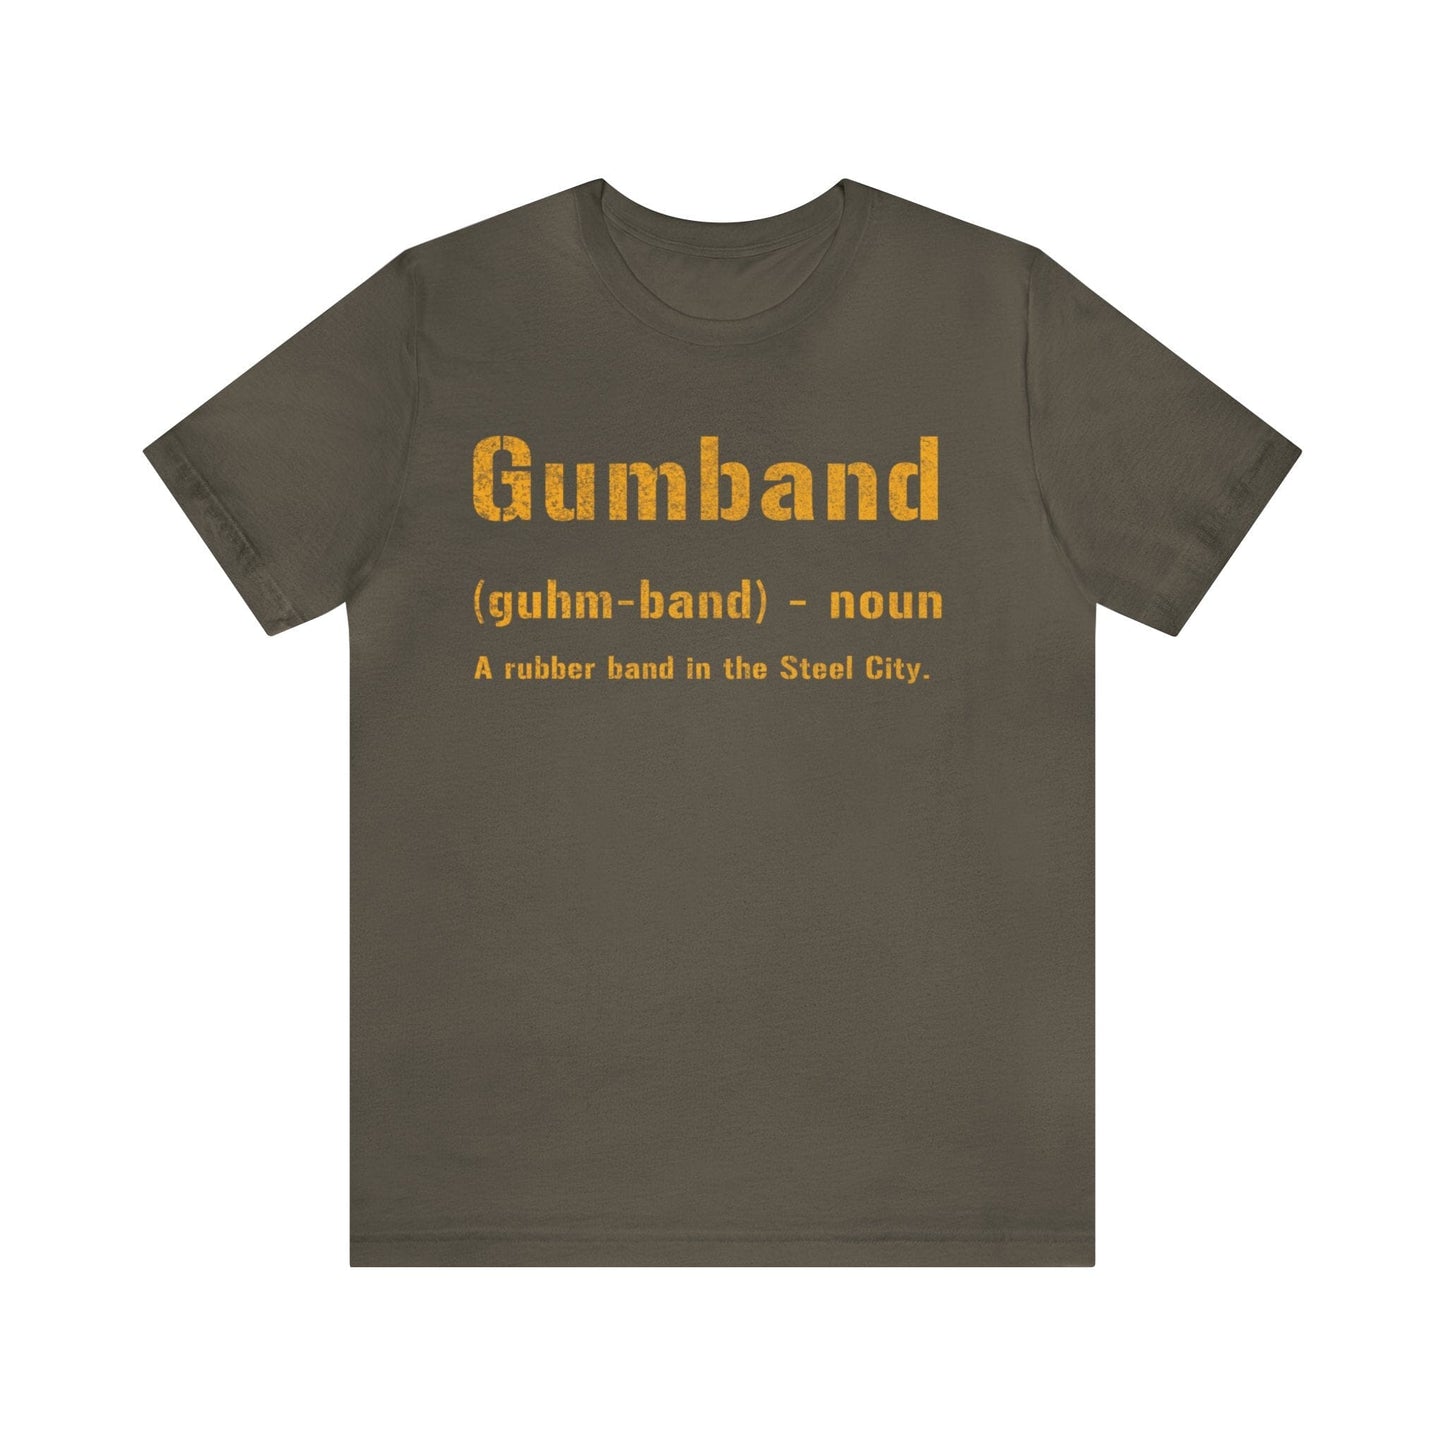 Pittsburghese Gumband T-Shirt - Steel City Slang T-Shirt Yinzergear Army S 